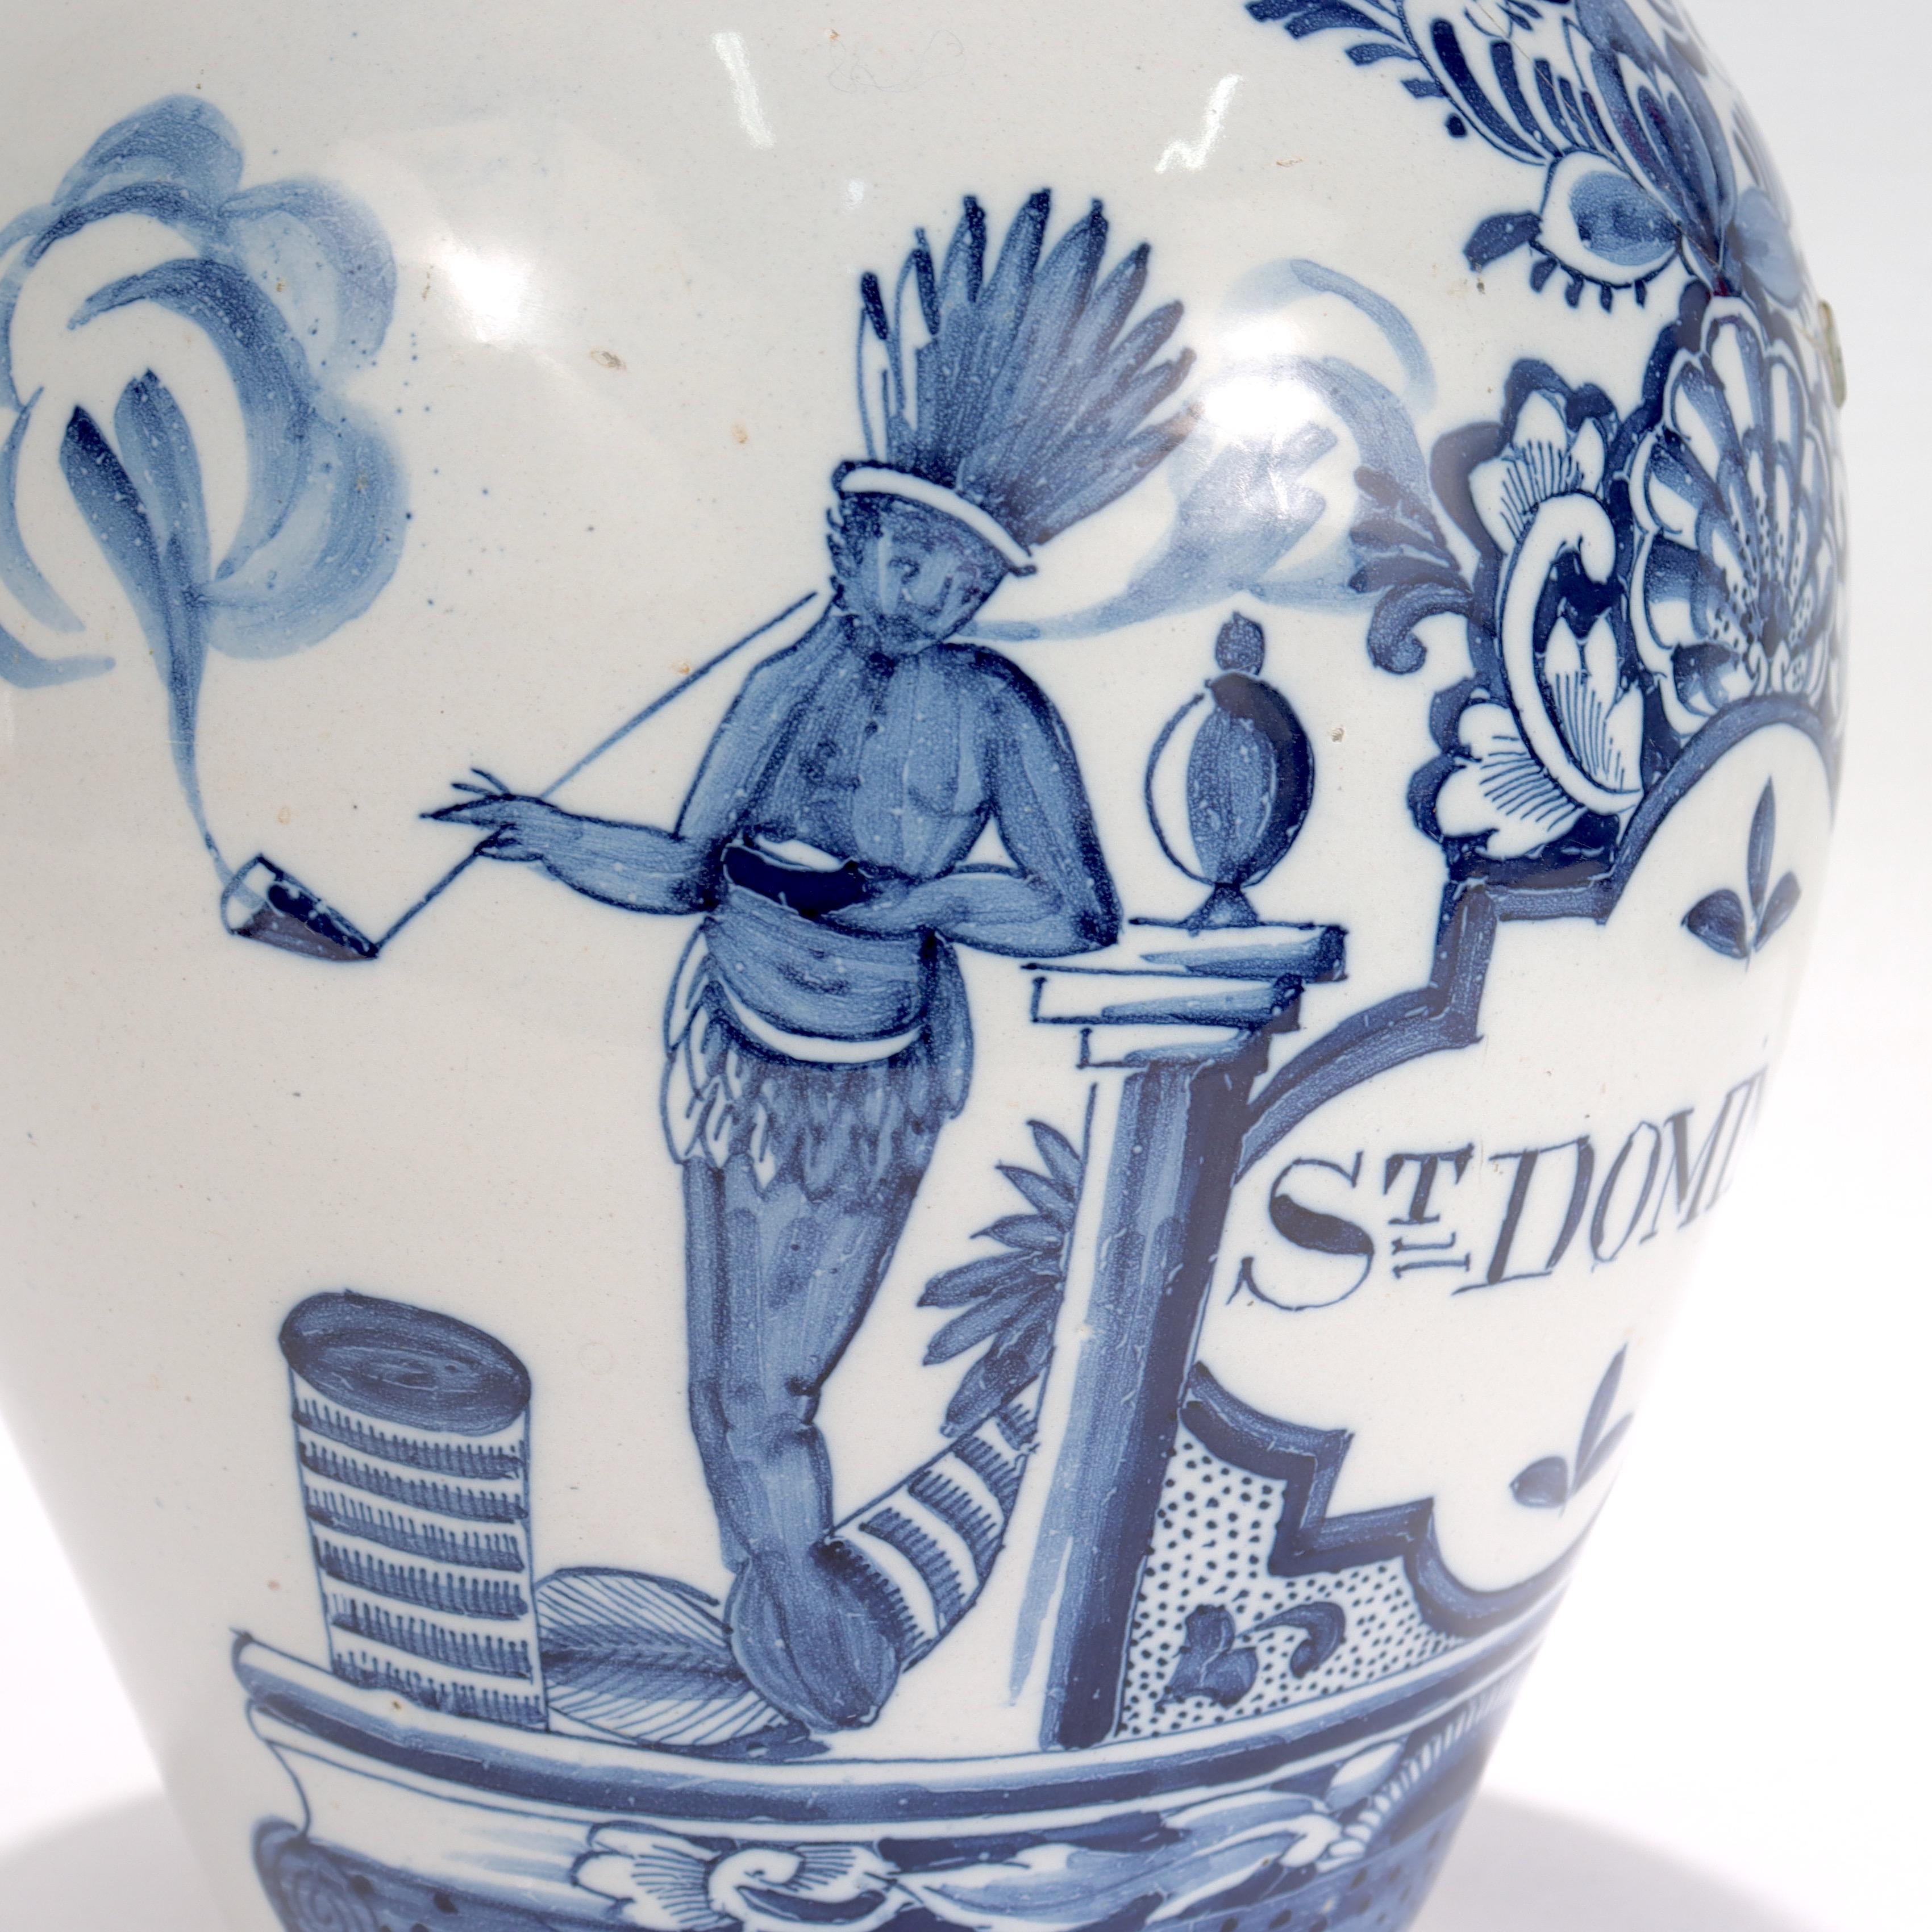 A fine antique Delft tobacco jar.

From the Dutch De Drie Klokken (The Three Bells) Pottery Factory.

Together with a period brass cover.

Originally designed as a vessel for 'Santo Domingo' tobacco (in the form of long plugs or twists of